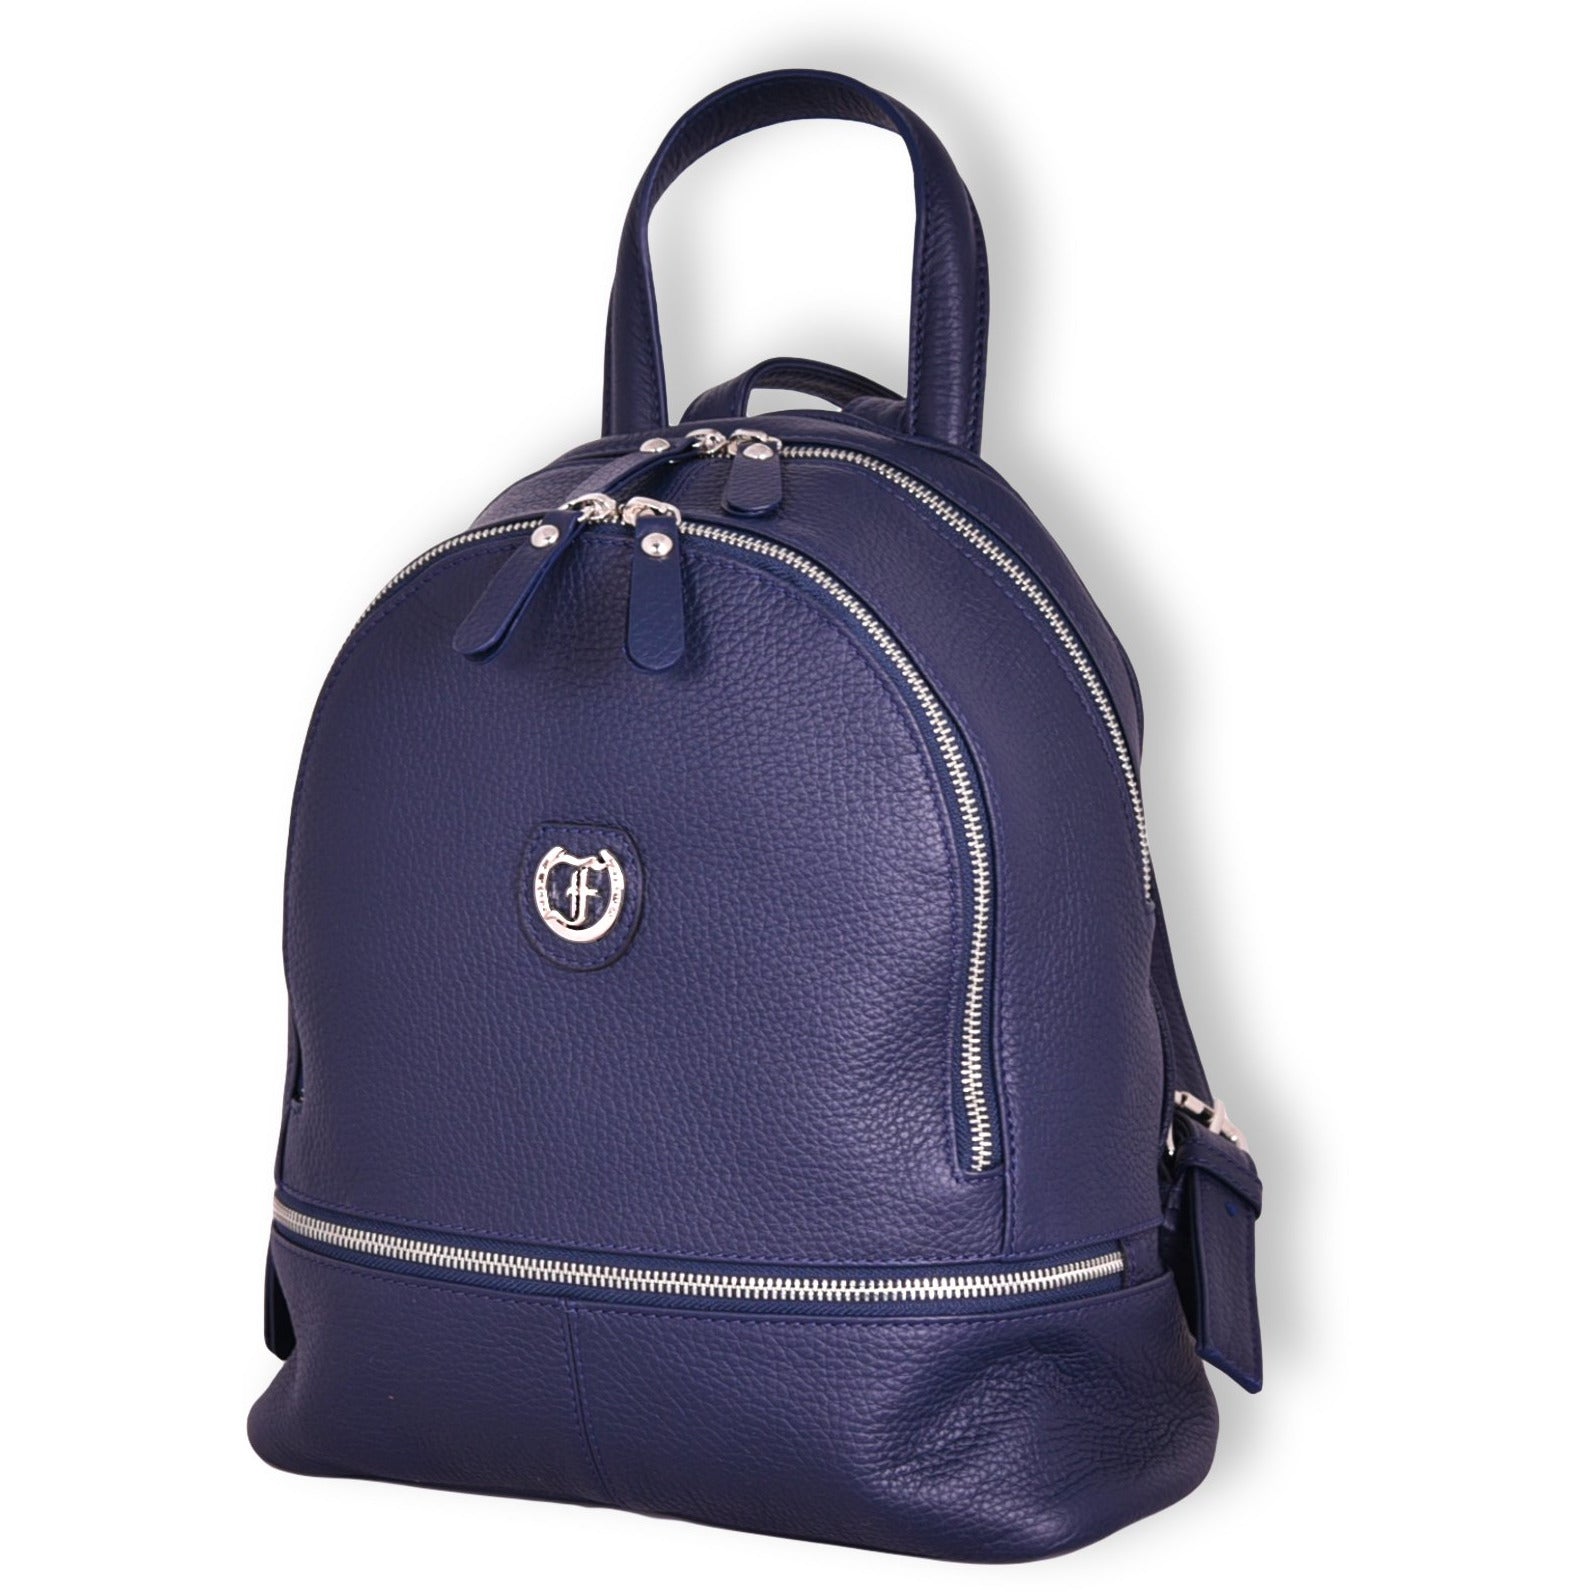 Brougham Backpack